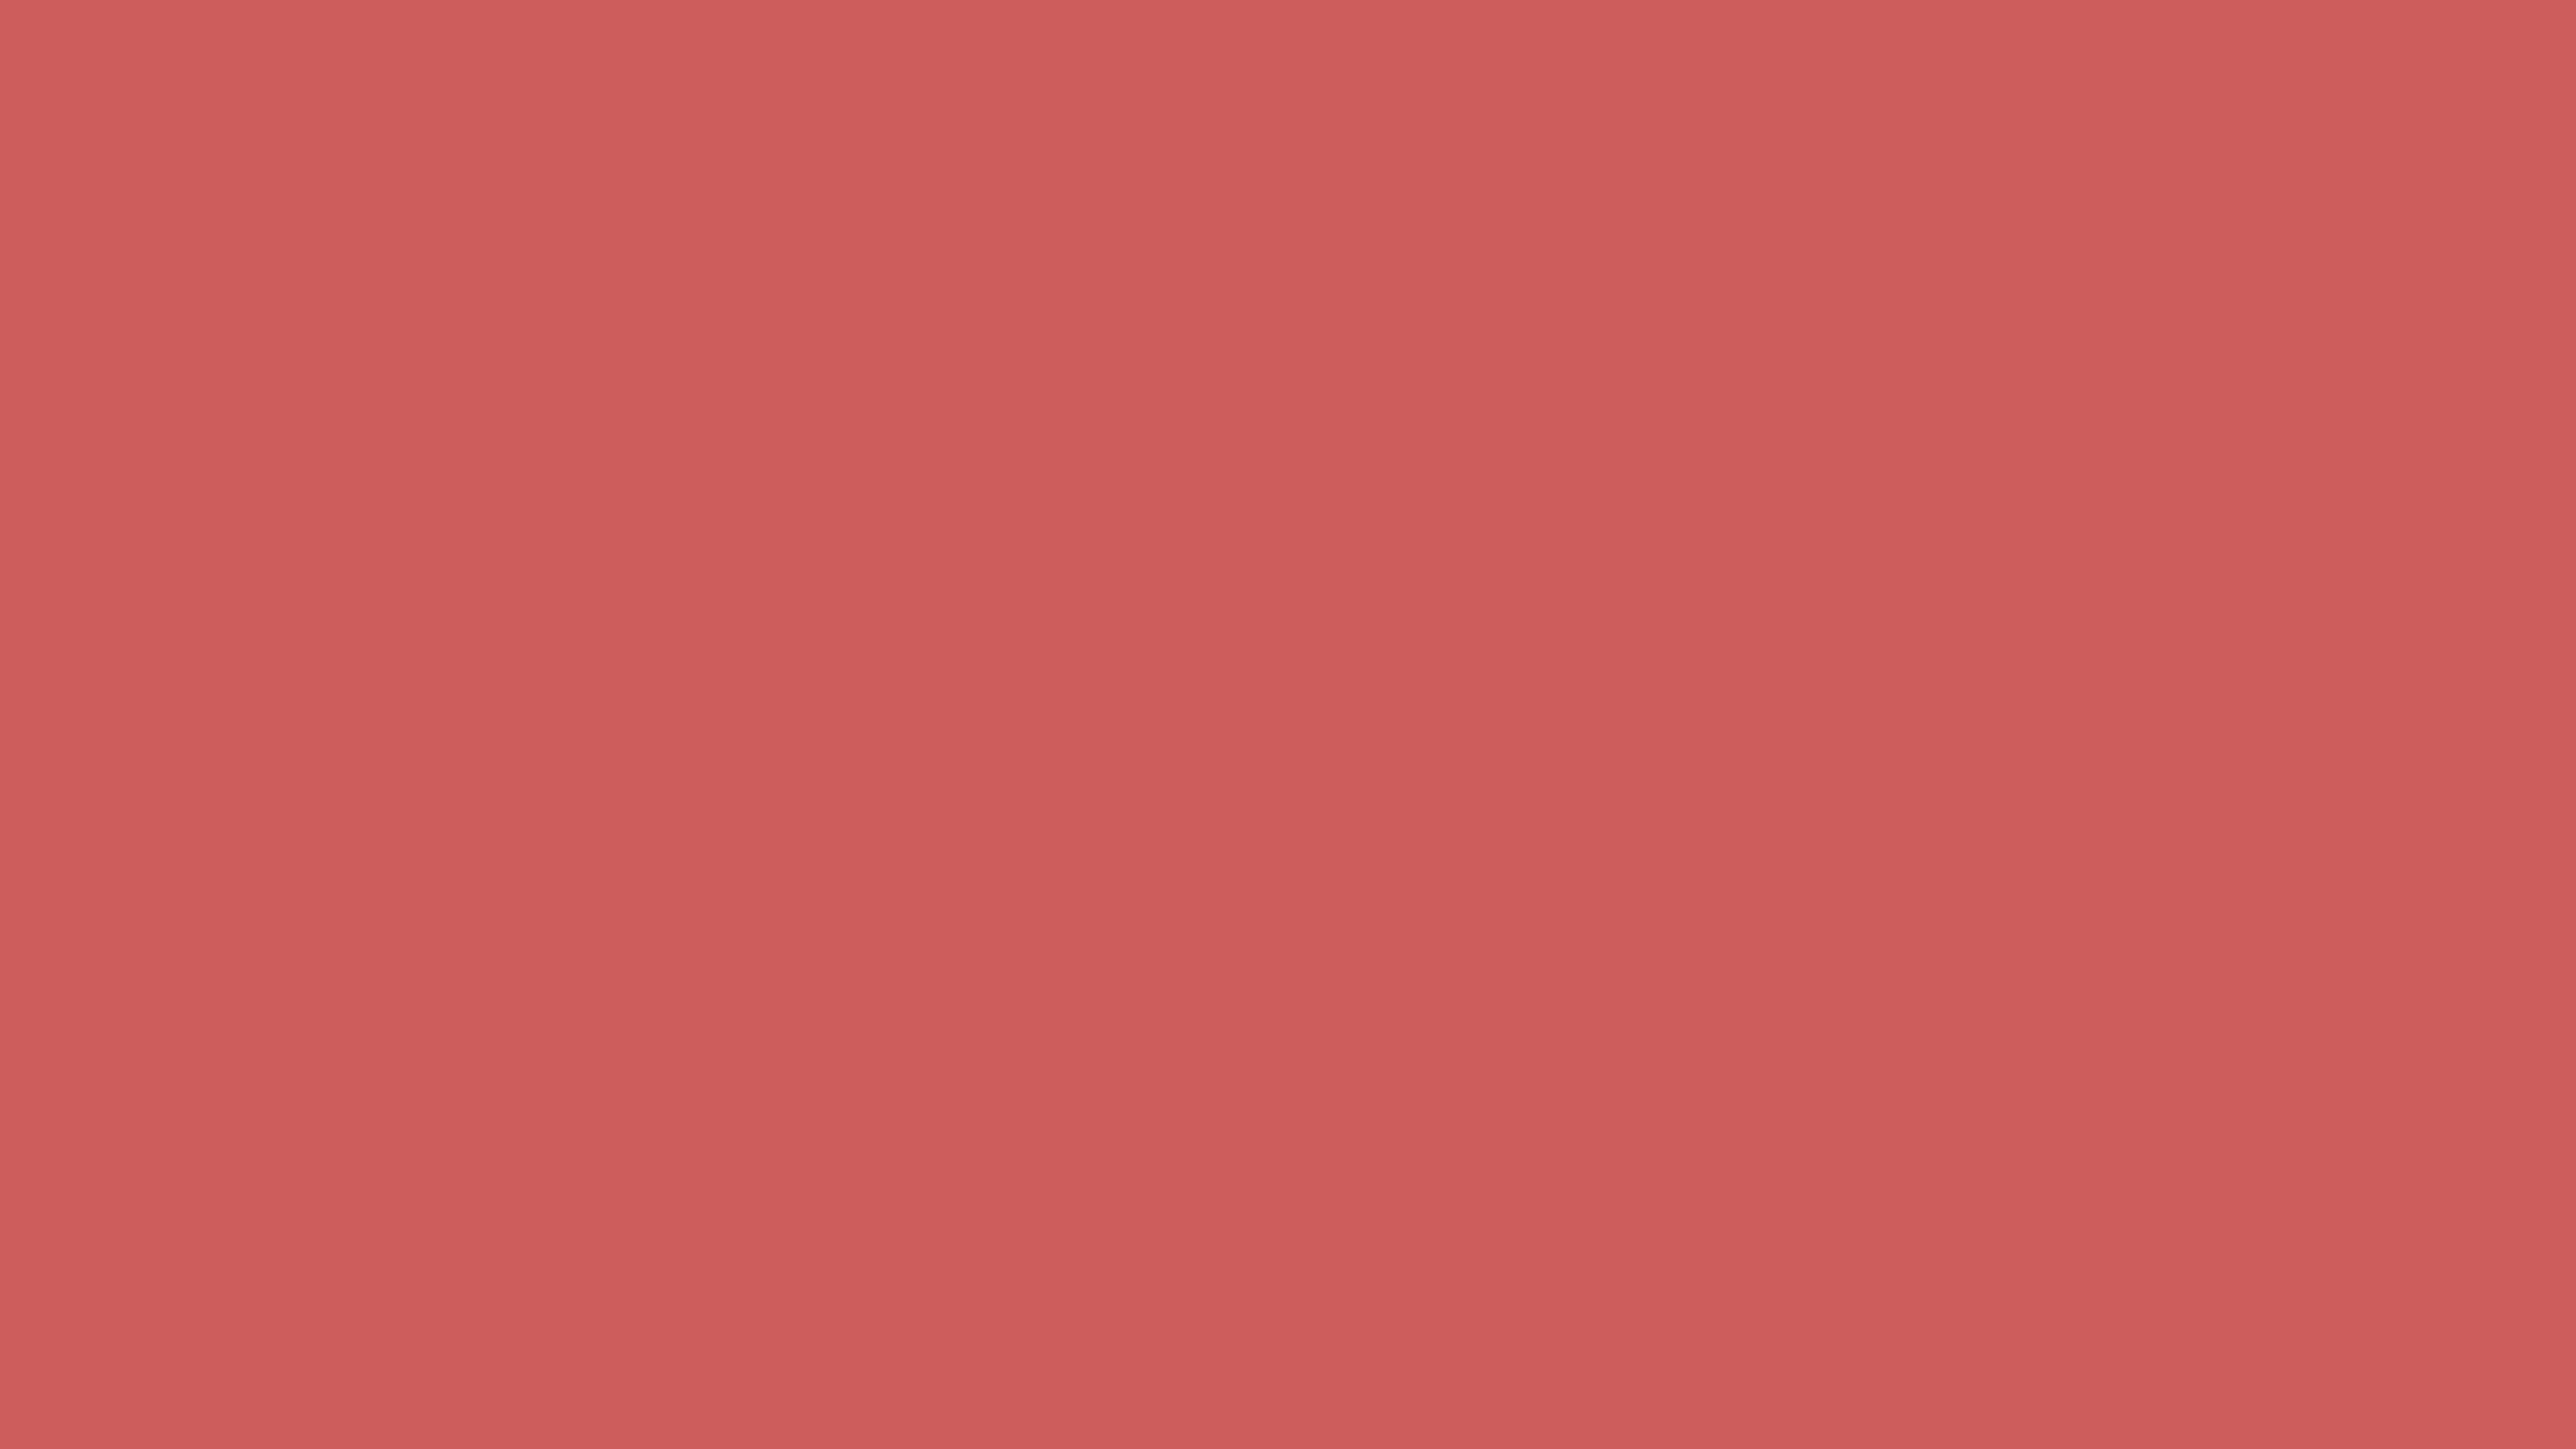 5120x2880 Indian Red Solid Color Background